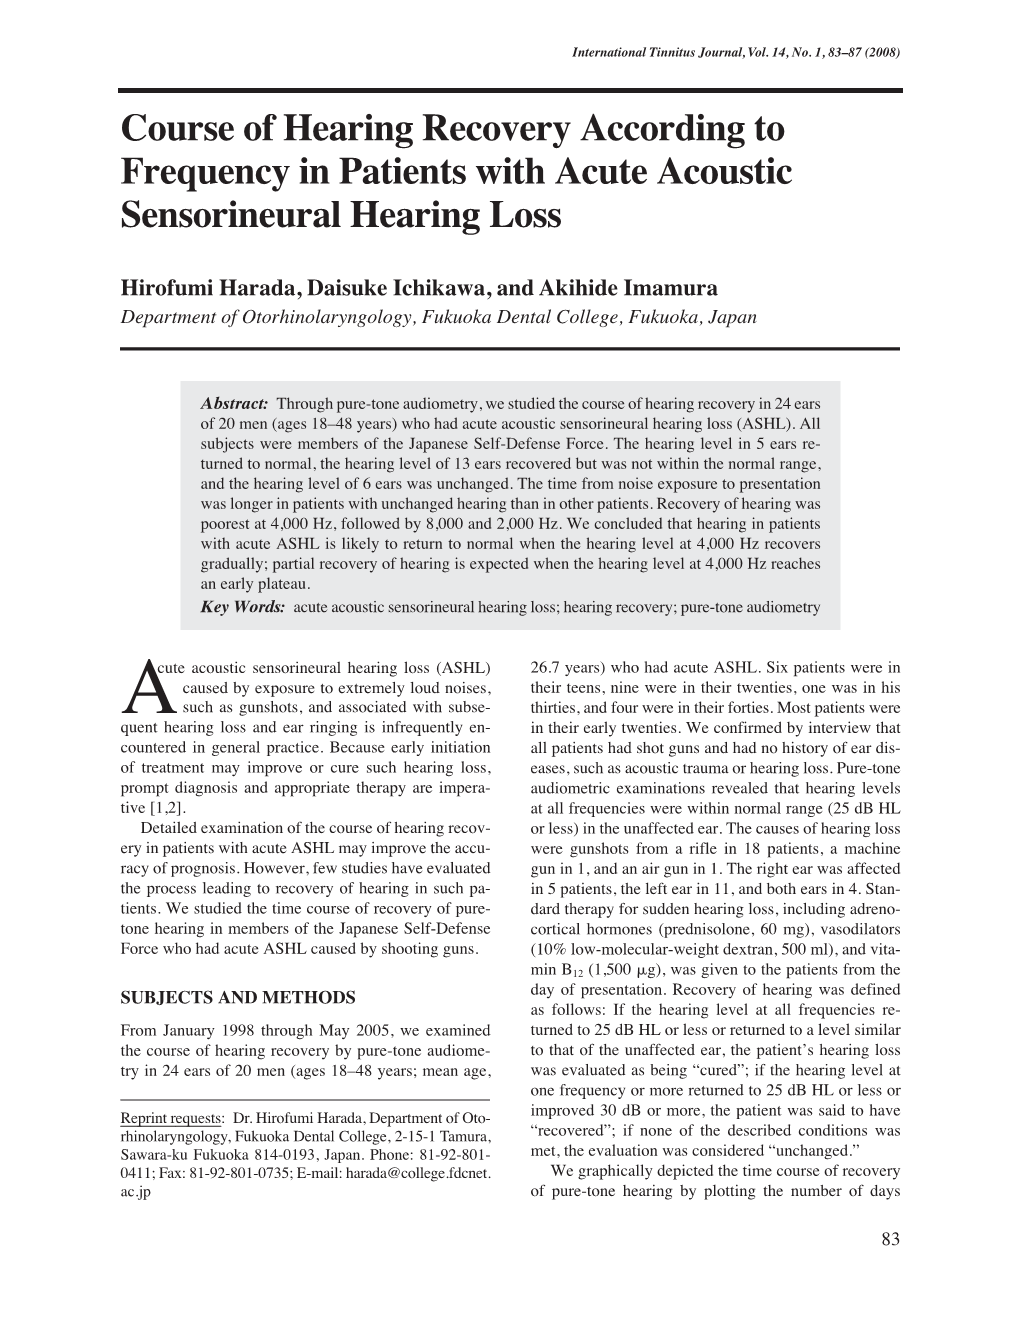 Course of Hearing Recovery According to Frequency in Patients with Acute Acoustic Sensorineural Hearing Loss